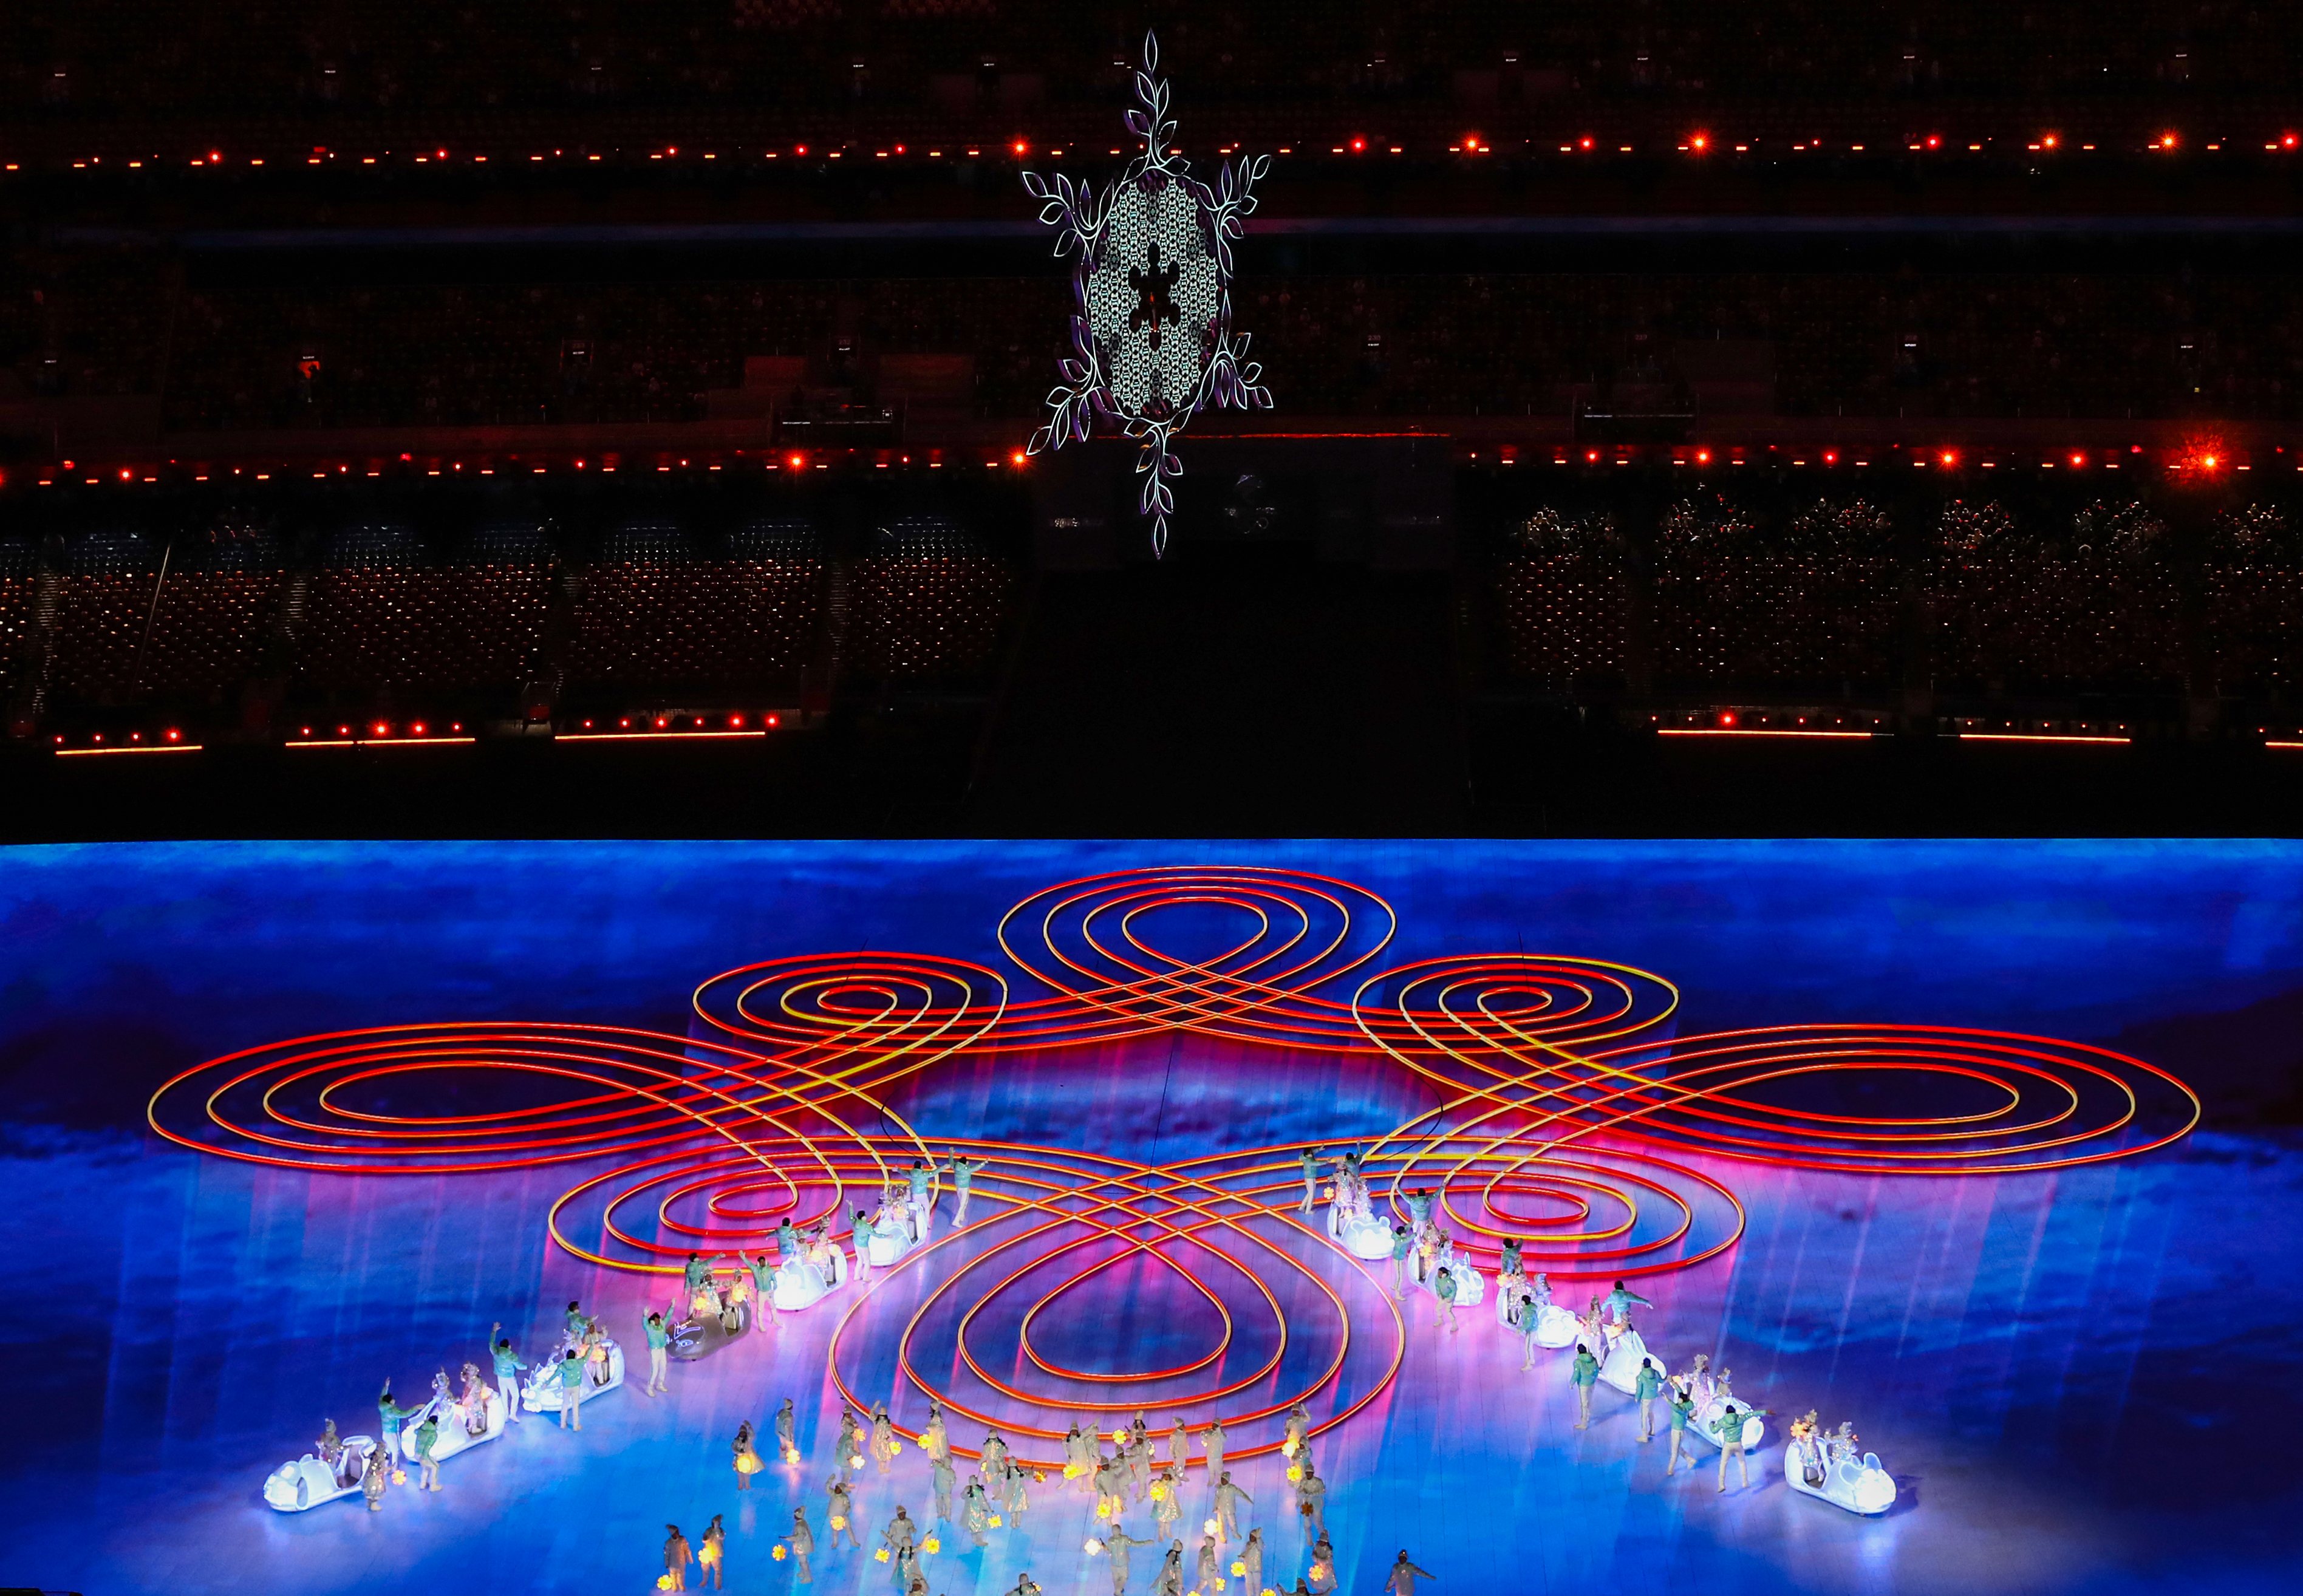 Closing ceremony of Winter Olympic Games in Beijing, China